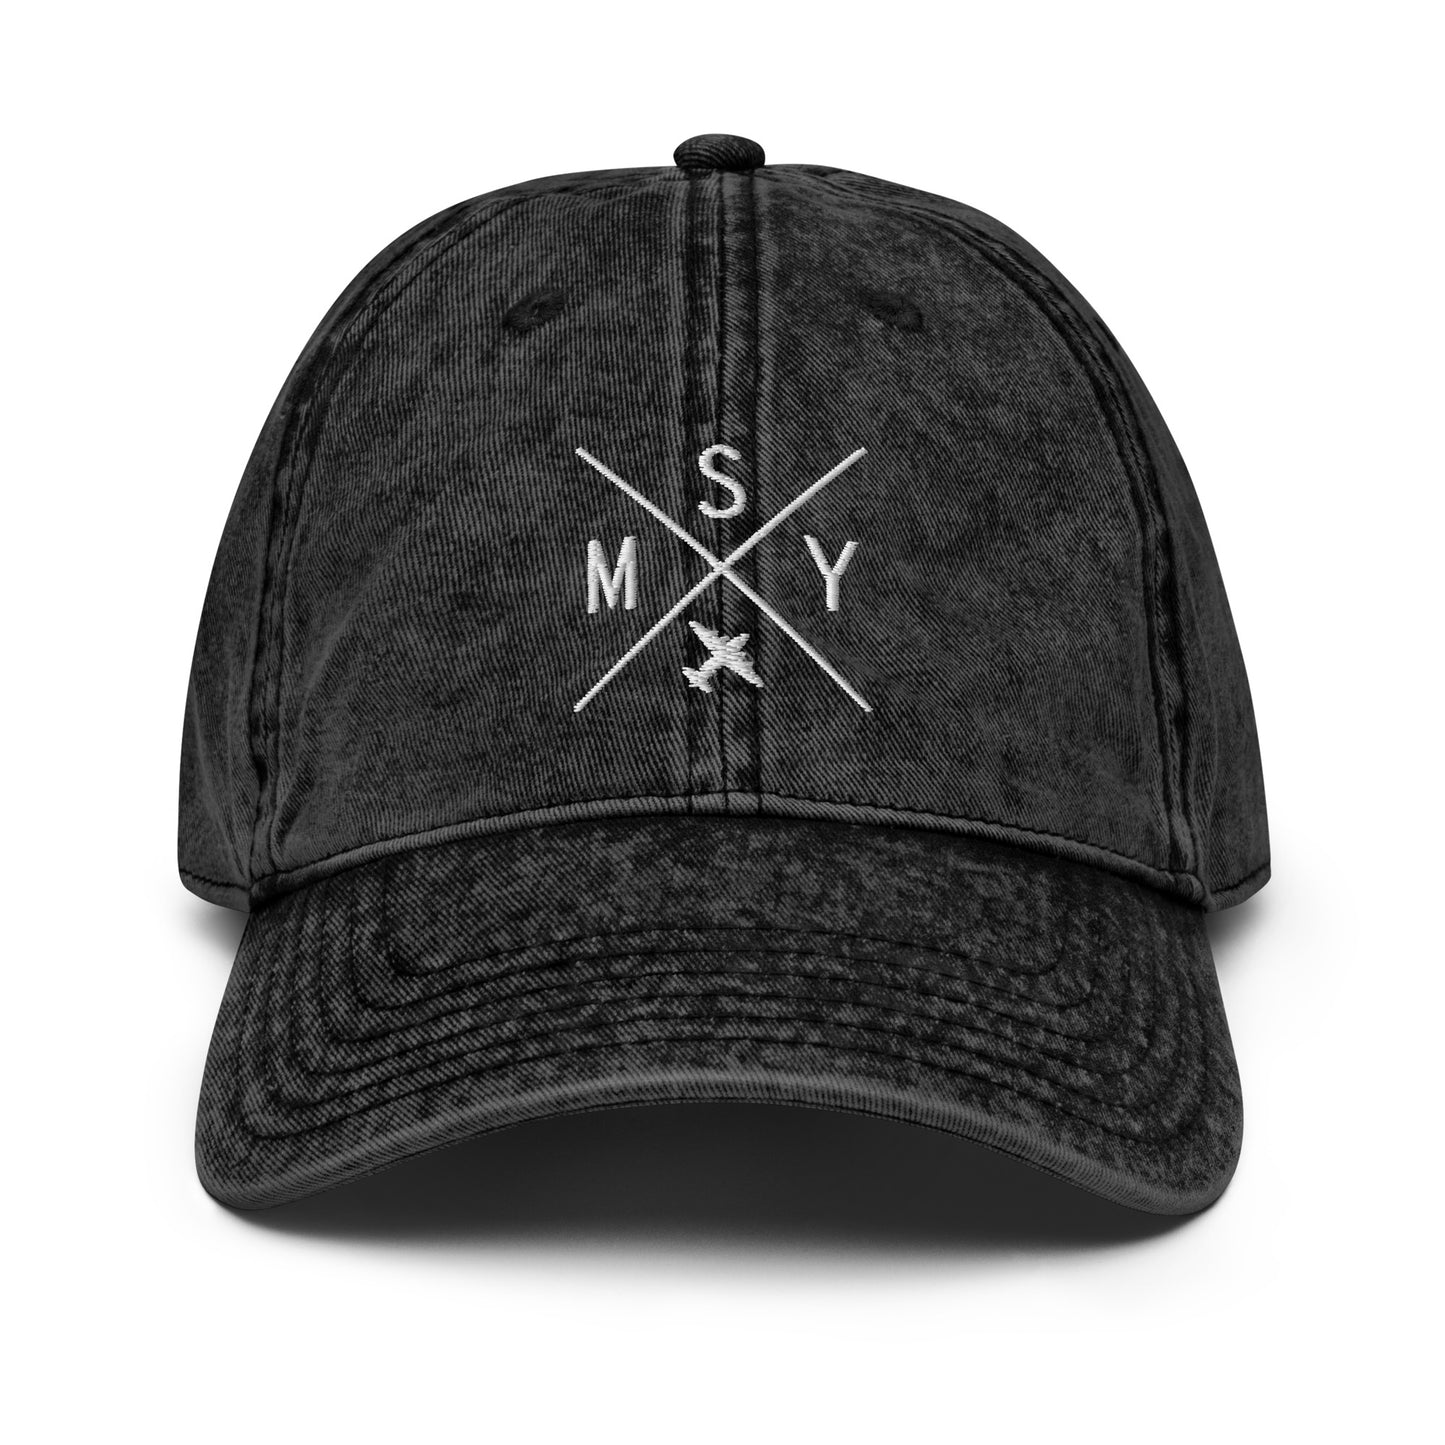 Crossed-X Cotton Twill Cap - White • MSY New Orleans • YHM Designs - Image 16